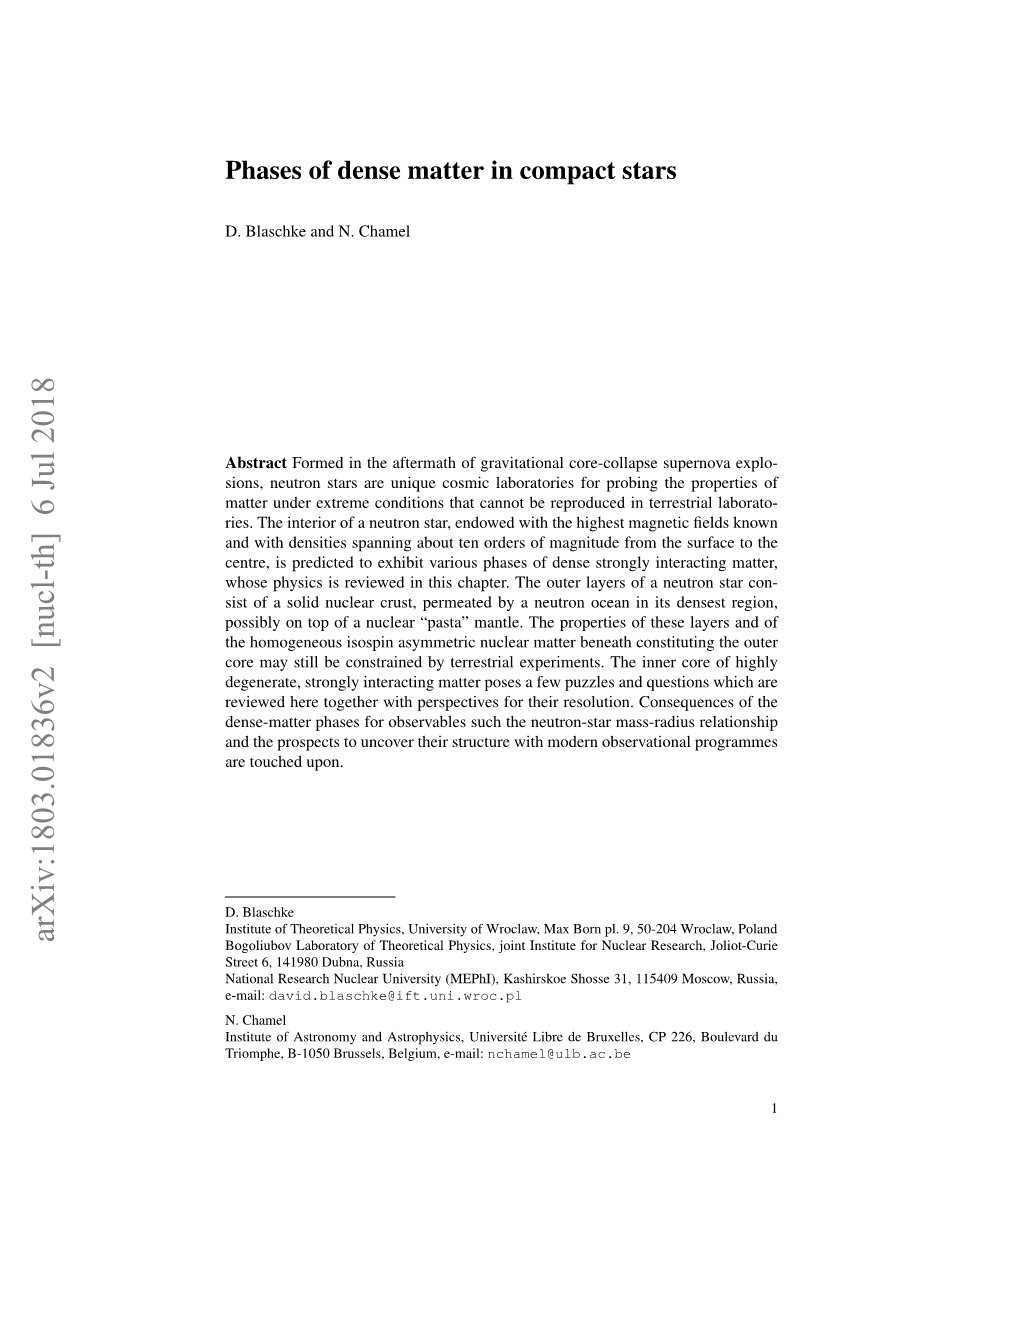 Phases of Dense Matter in Compact Stars